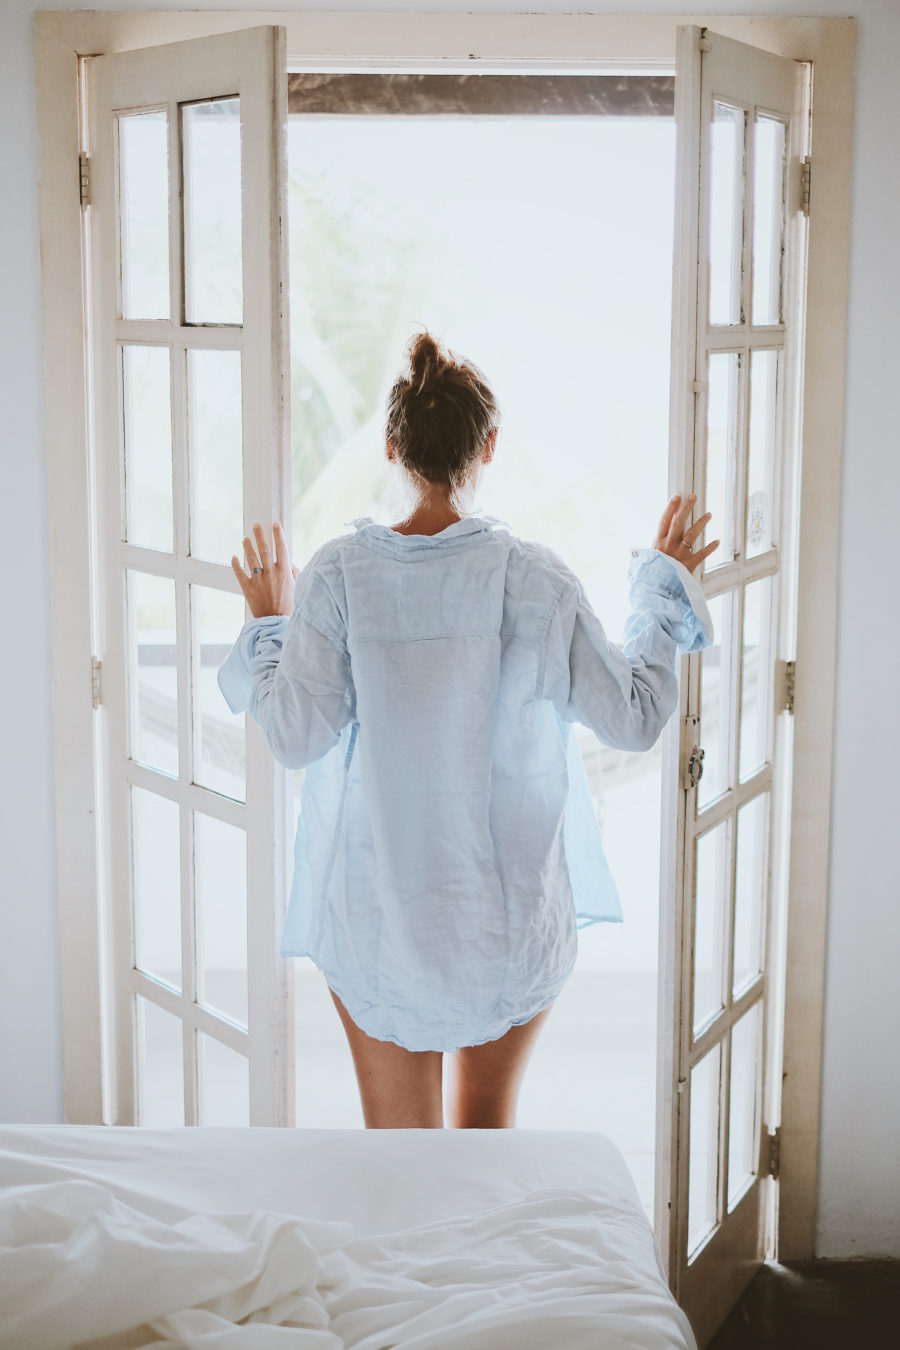 3 Things You Must Do Every Morning For A Successful, Happy Day